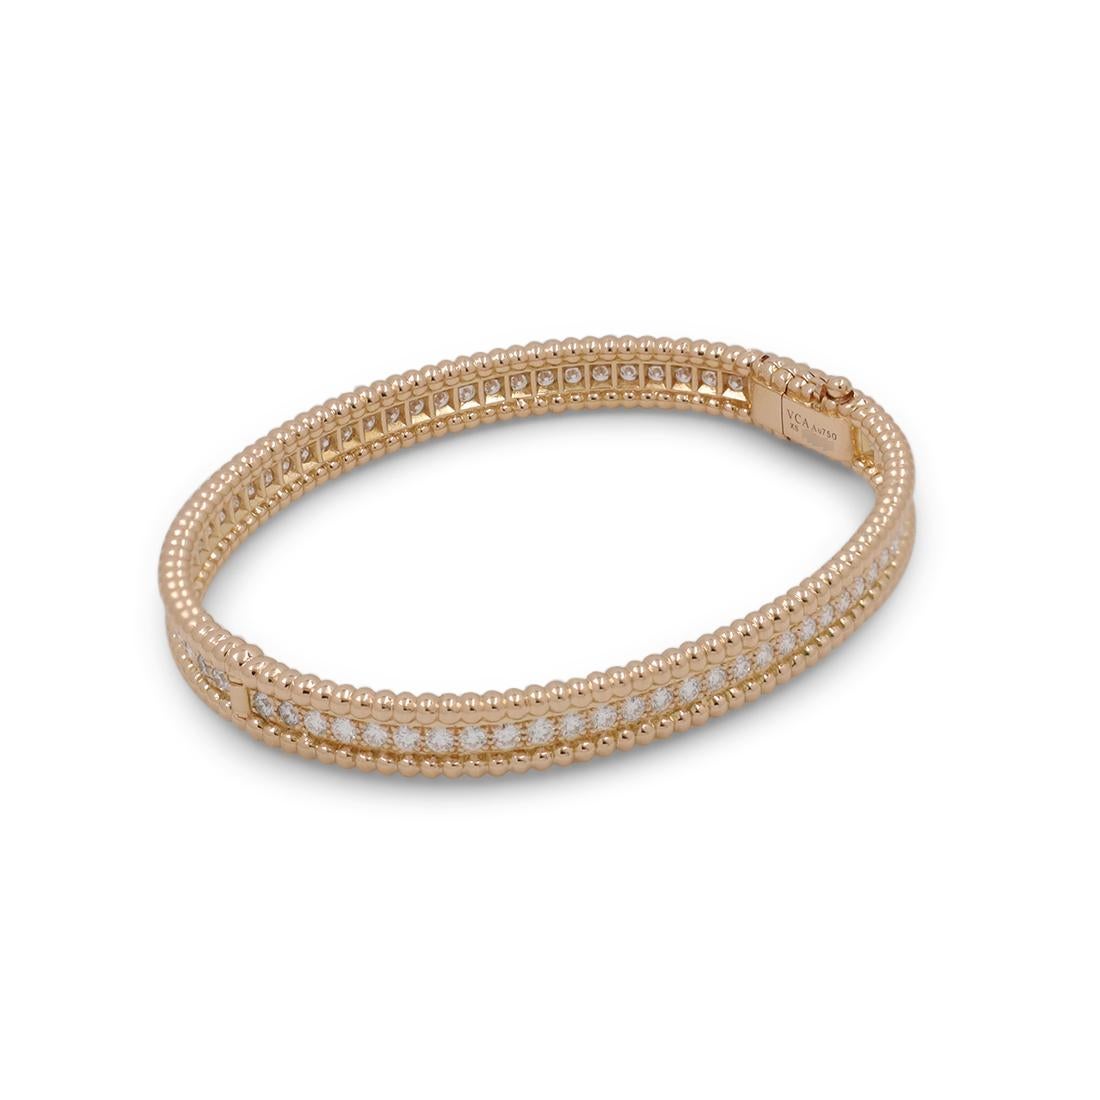 Authentic Van Cleef & Arpels 'Perlée Diamonds' bracelet crafted in 18 karat rose gold features a single row of high-quality round brilliant cut diamonds weighing an estimated 1.94 carats total weight (G, VS). Signed VCA, Au750, XS, with serial